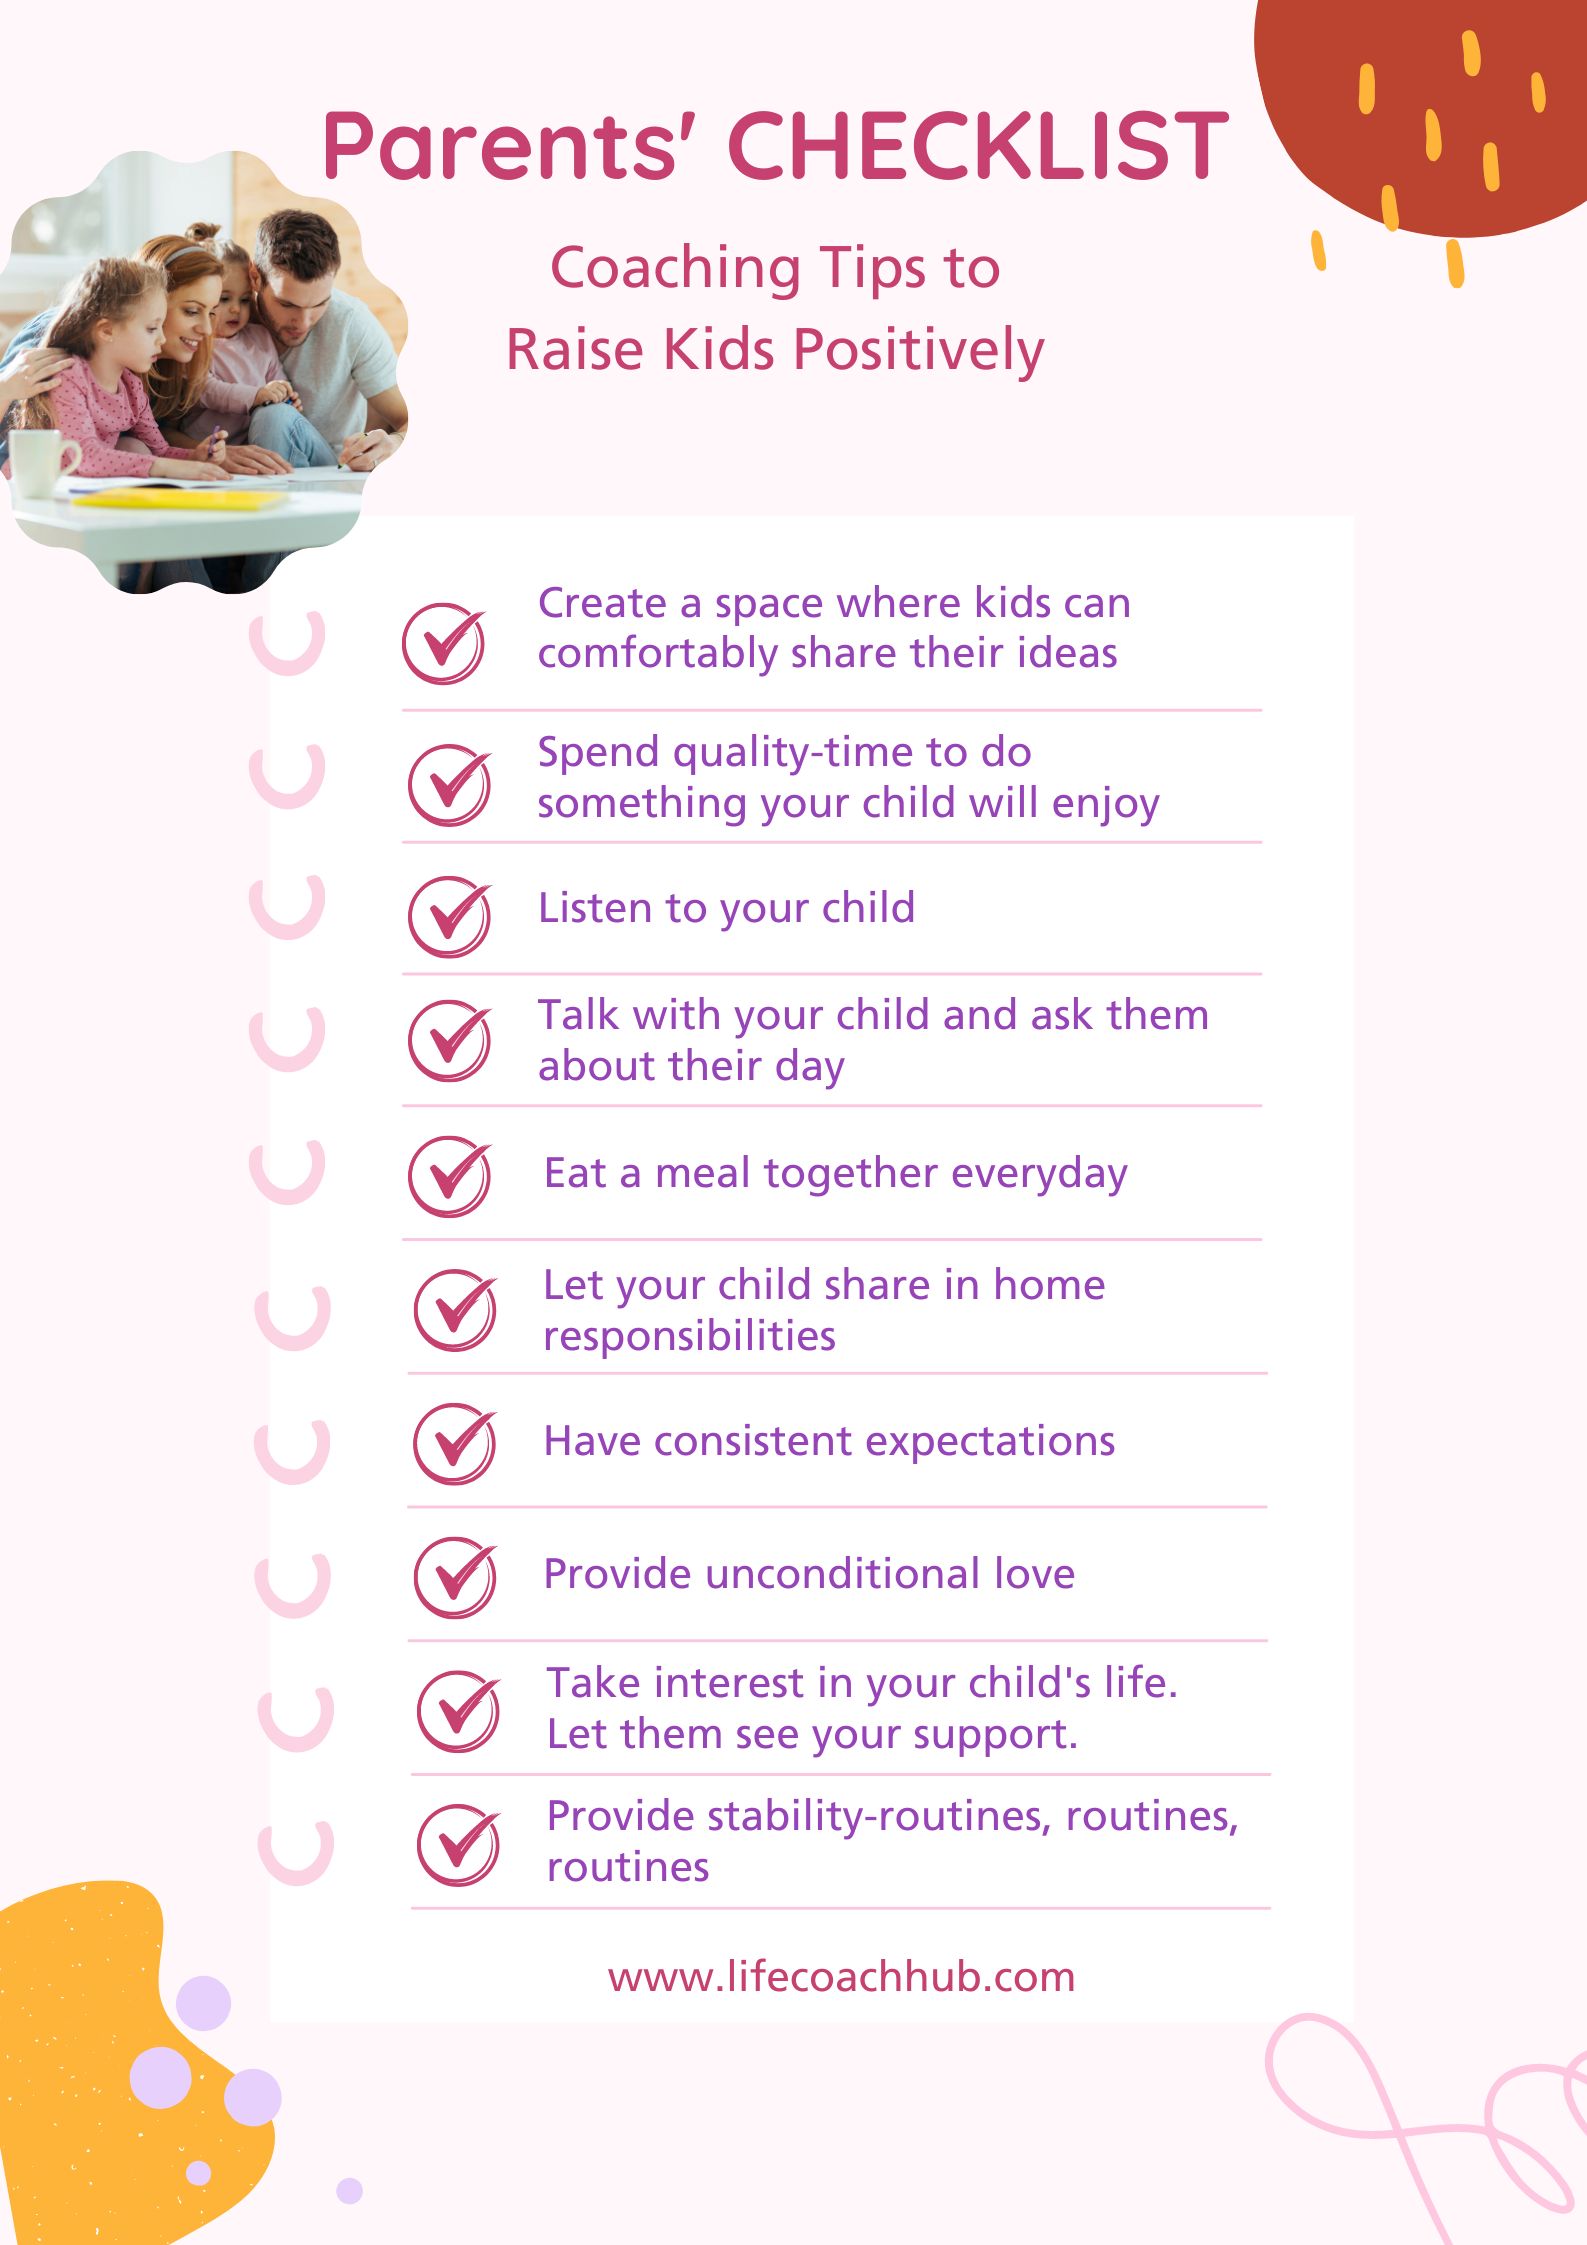 Parents' Checklist: Daily List to Raise Kids Positively